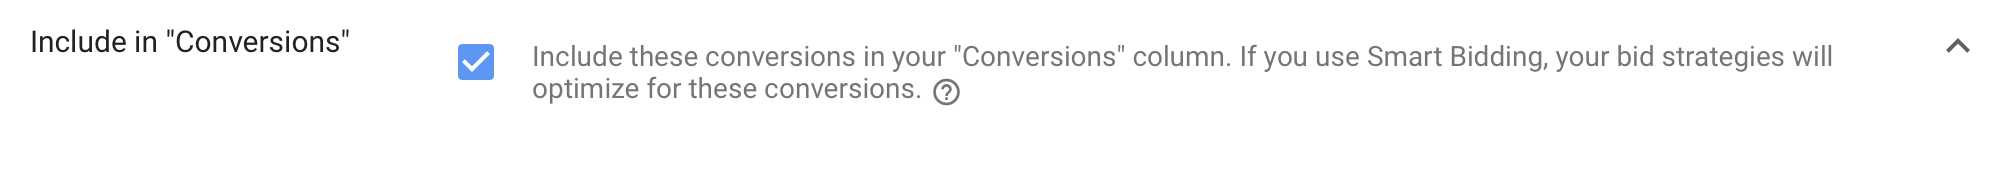 Google Ads Include in Conversions